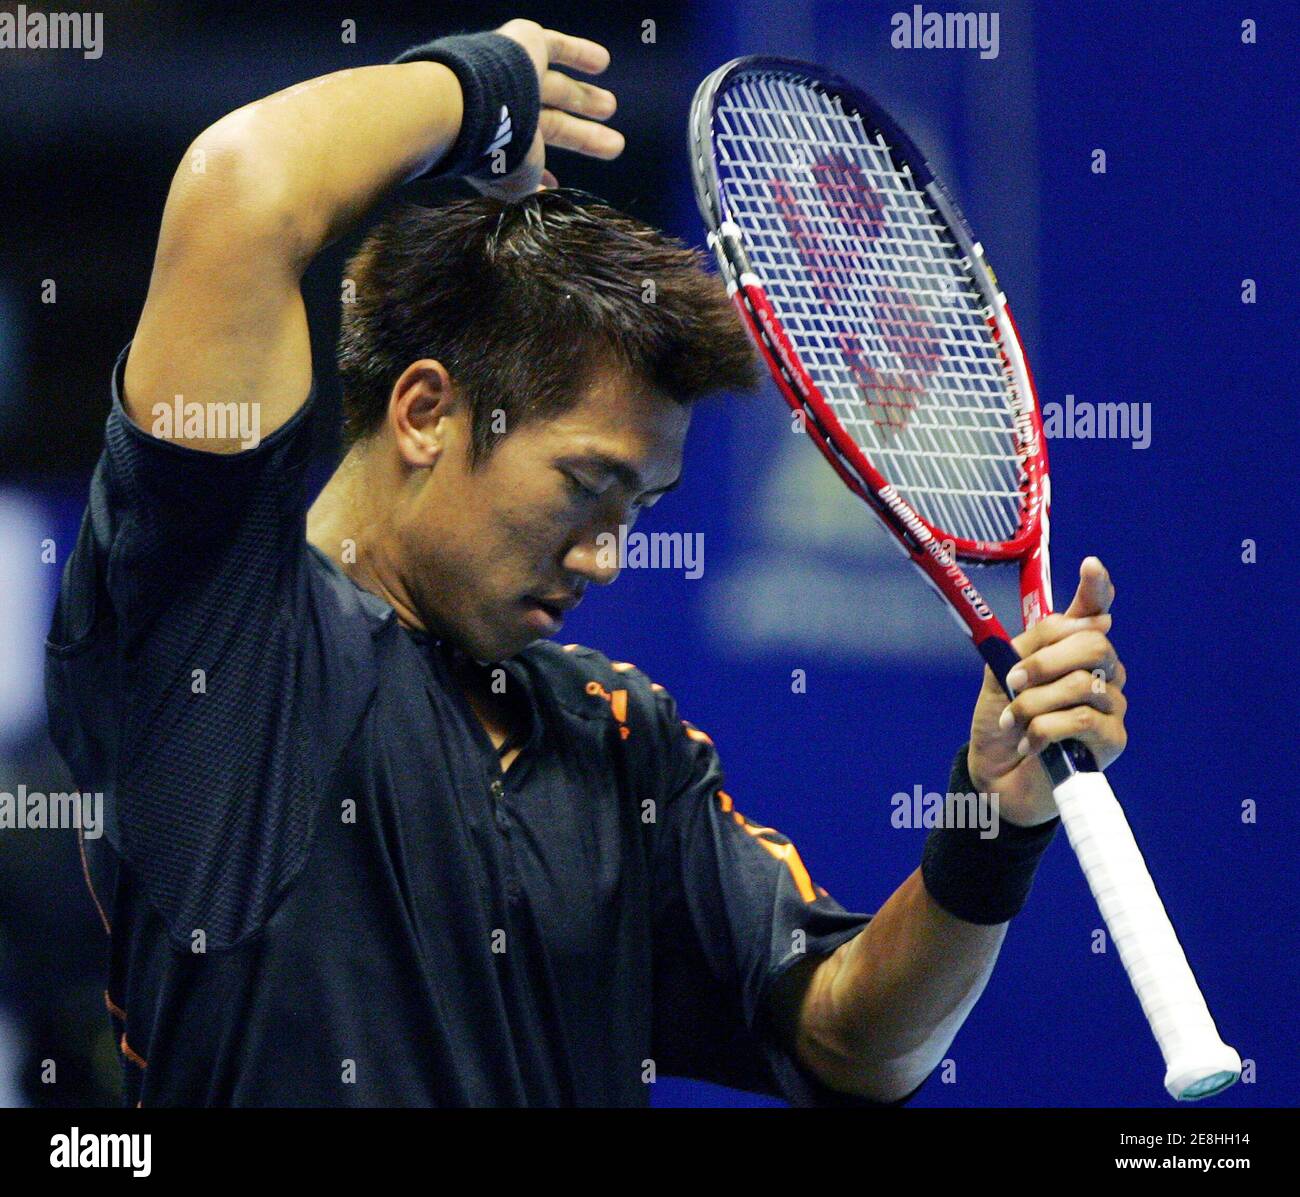 Thailand's Paradorn Srichaphan reacts during his semi-final match against Britain's Andy Murray at the Thailand Open 2005 tennis tournament in Bangkok October 1, 2005. Murray won the match 7-6 5-7 6-2. REUTERS/Chaiwat Subprasom Stock Photo